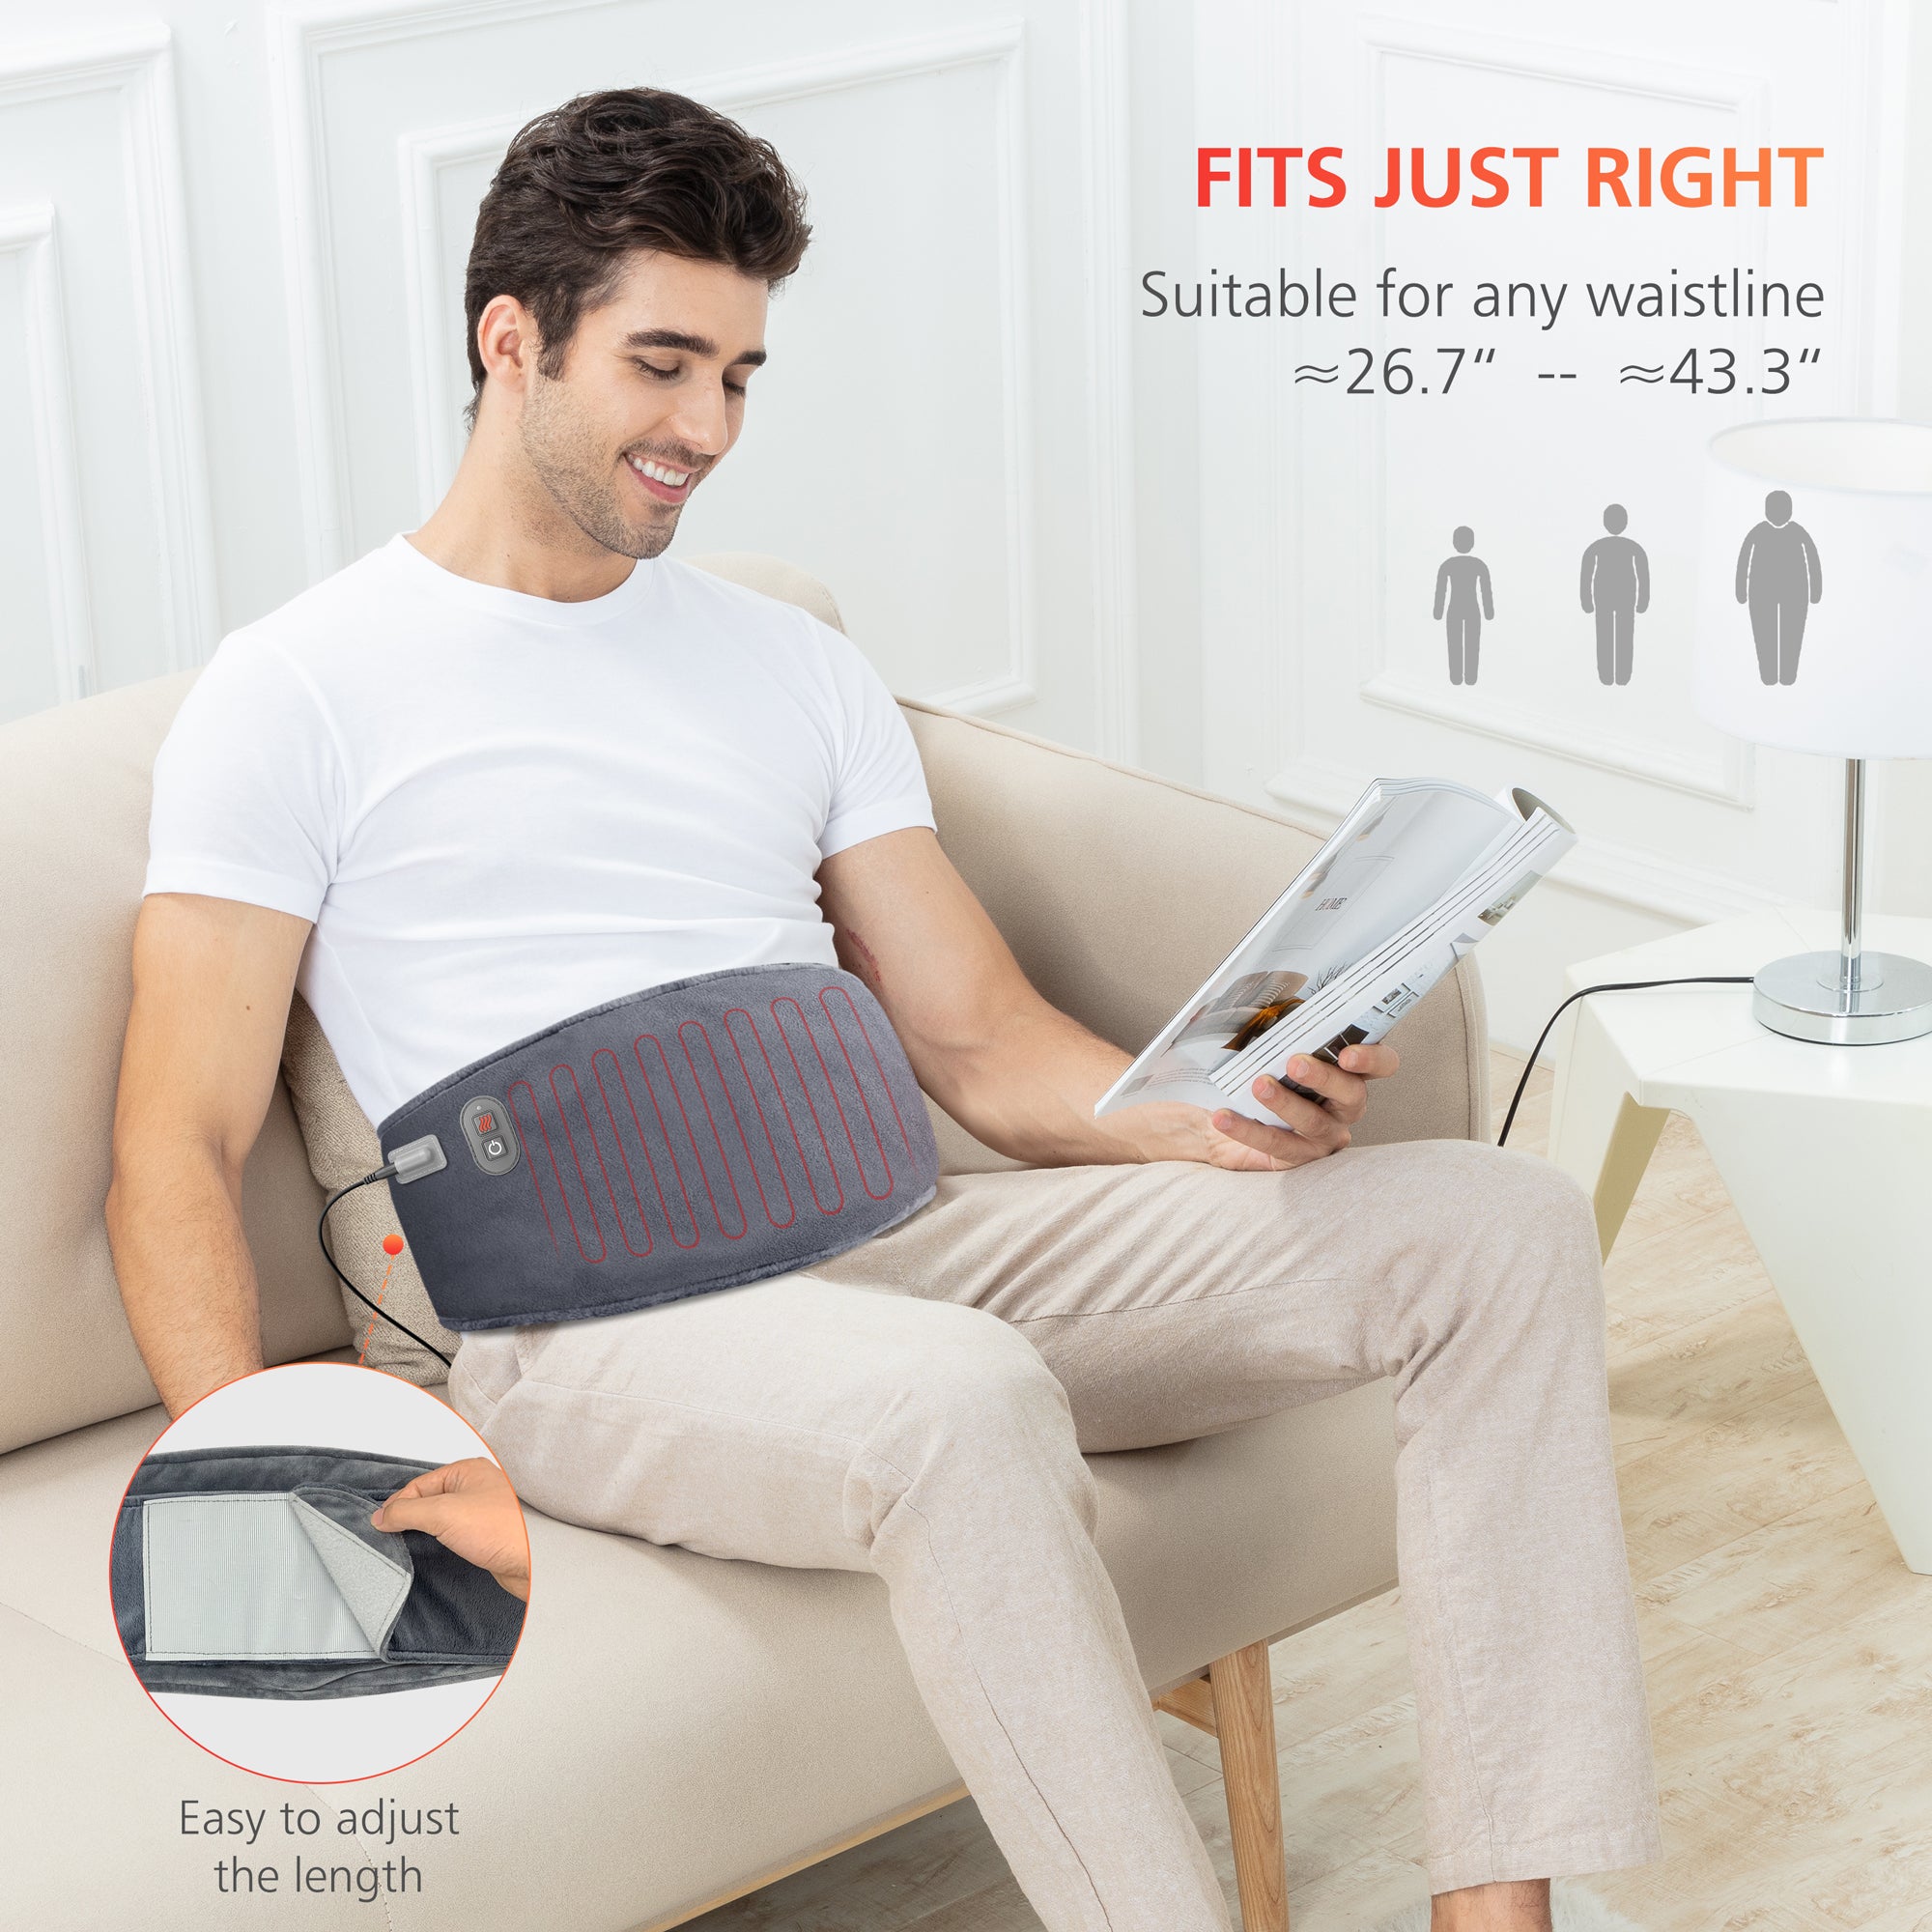 Comfier Heating Pad for Back Pain Relief with Adjustable Strap - 6004